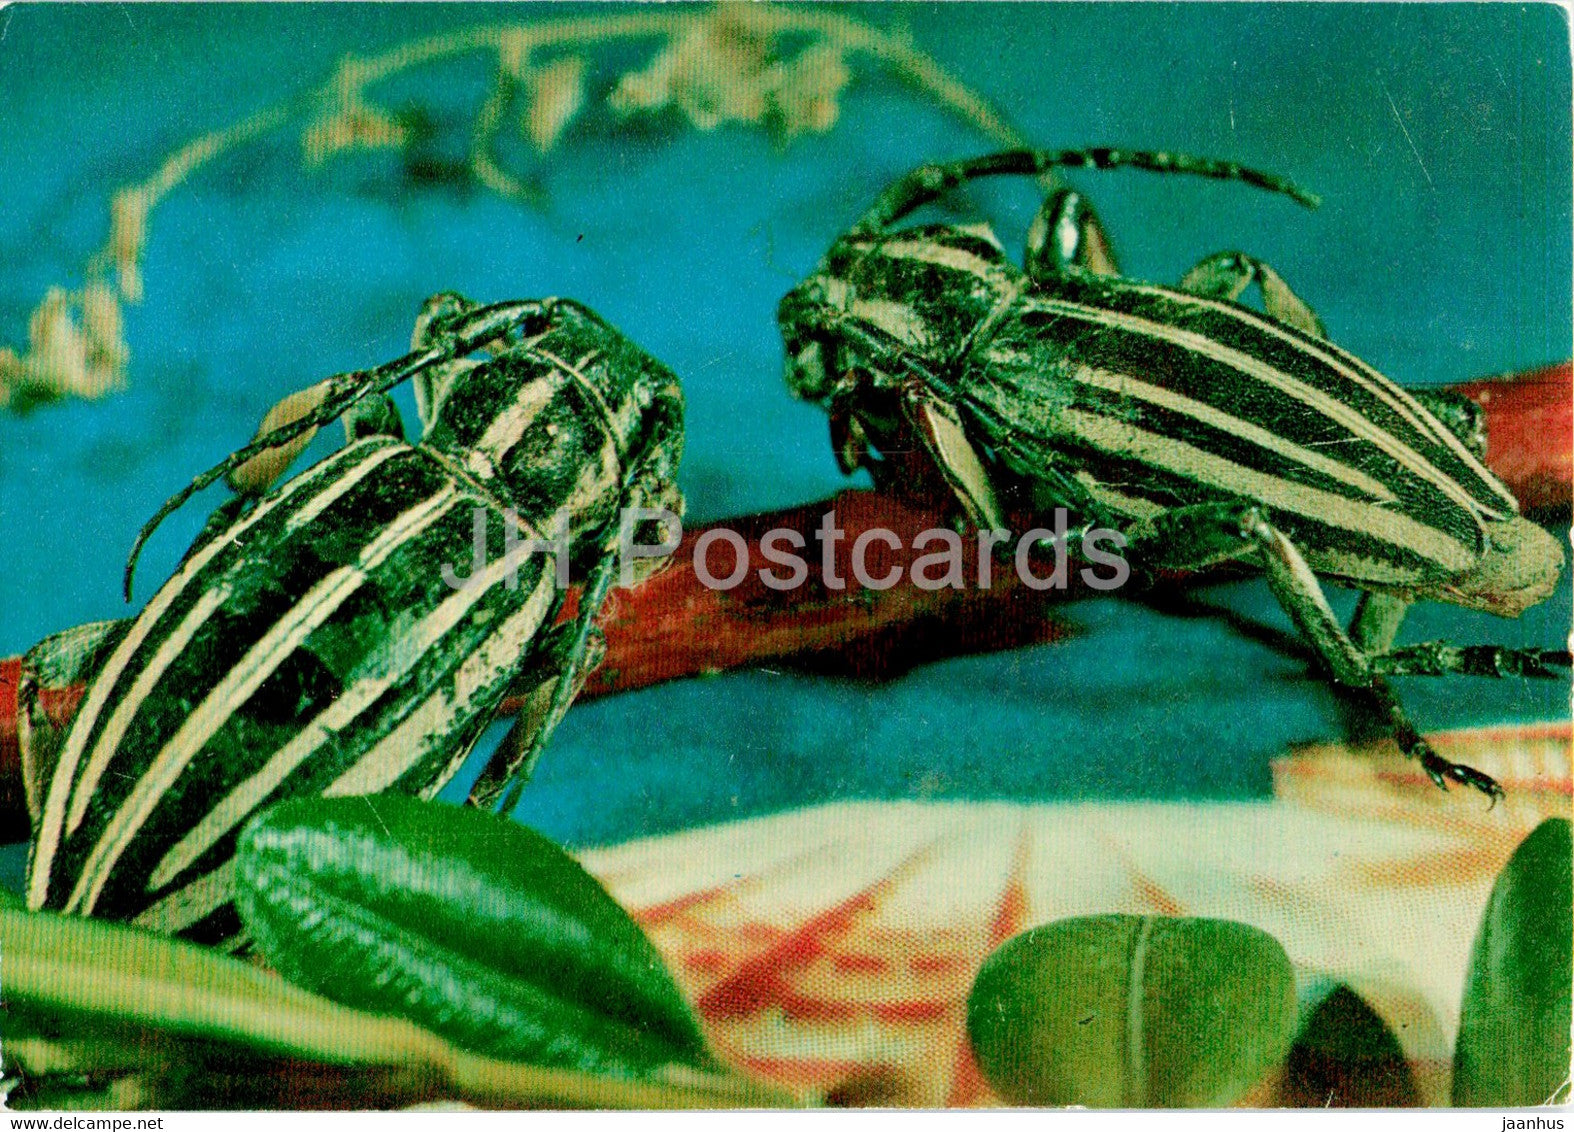 Dorcadion grande - insects - 1977 - Russia USSR - unused - JH Postcards